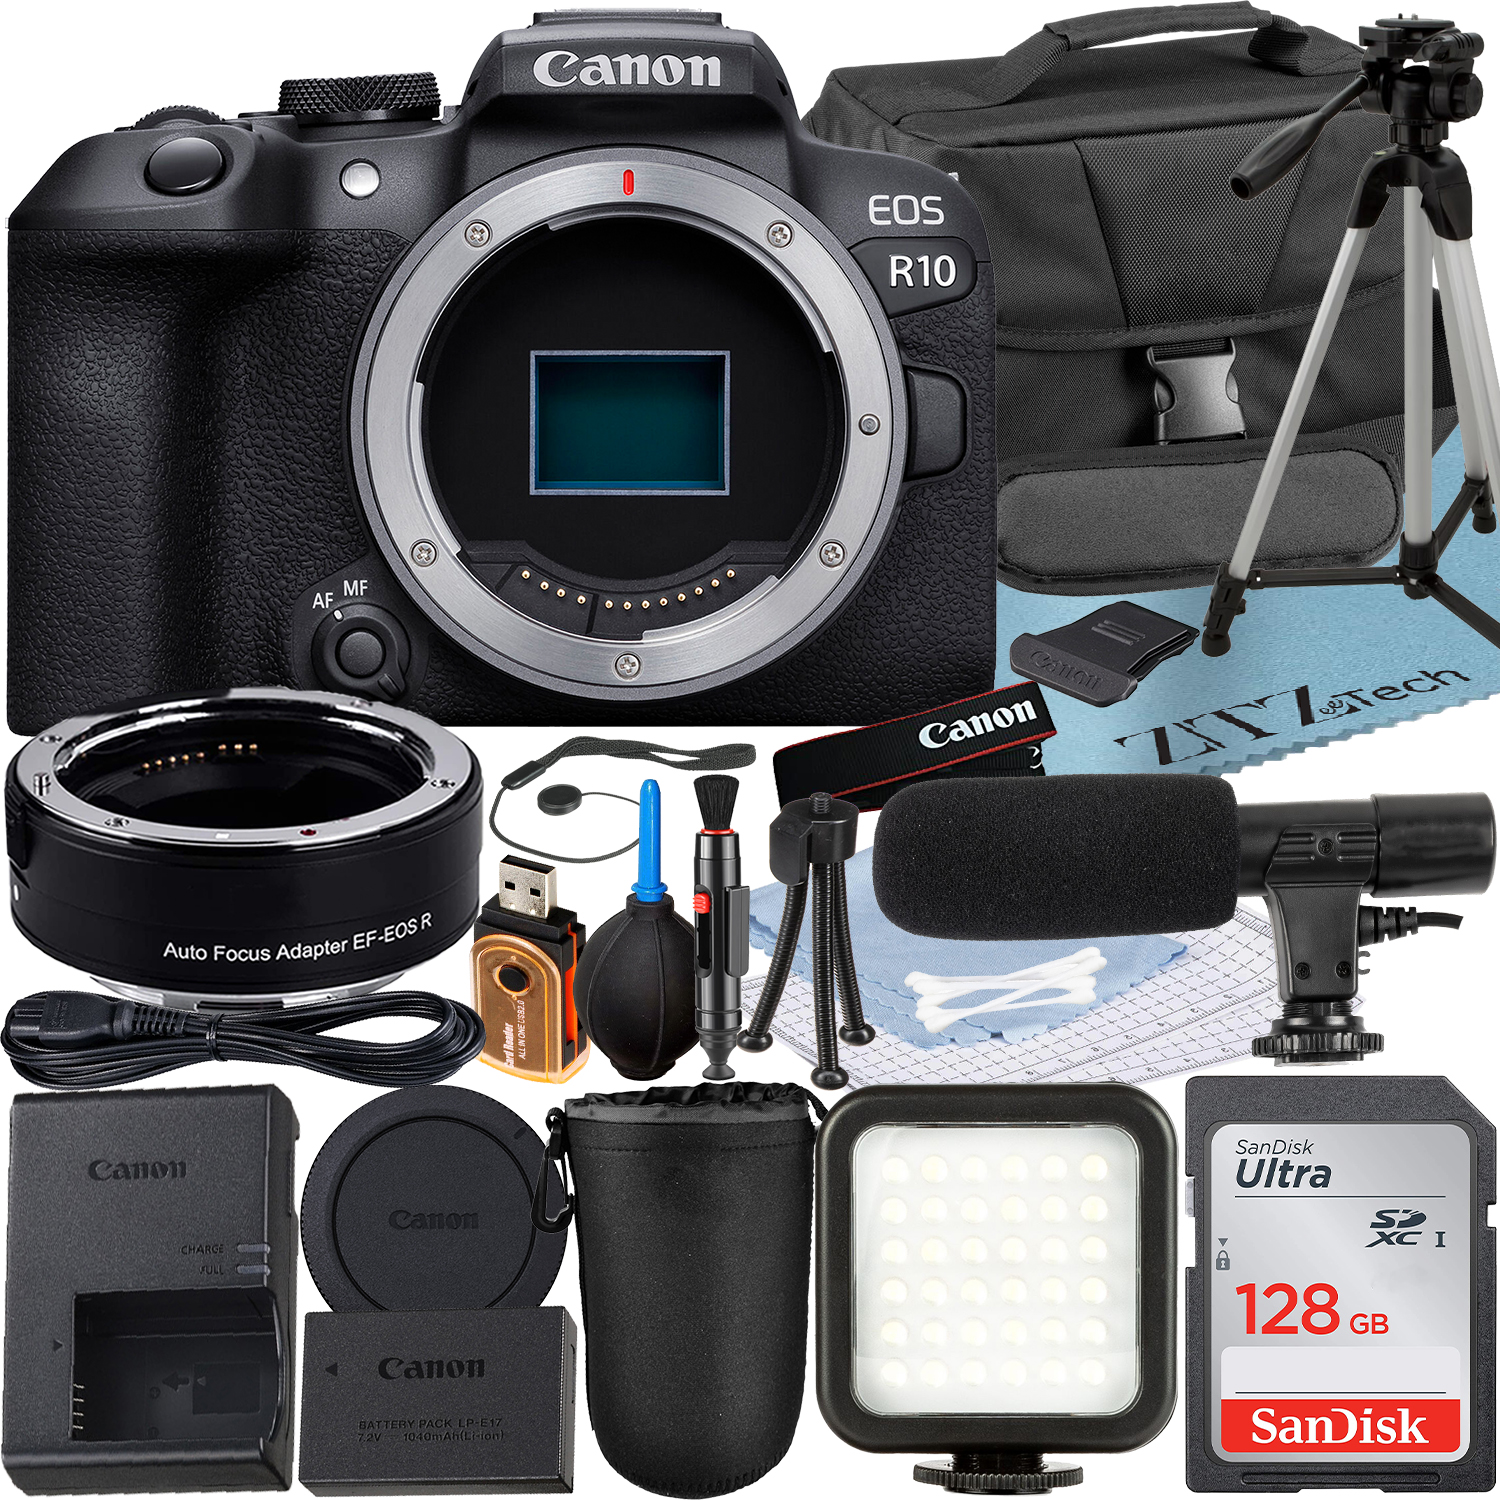 Canon EOS R10 Mirrorless Camera (Body) with Mount Adapter + SanDisk 128GB Memory Card + Case + LED Flash + ZeeTech Accessory Bundle